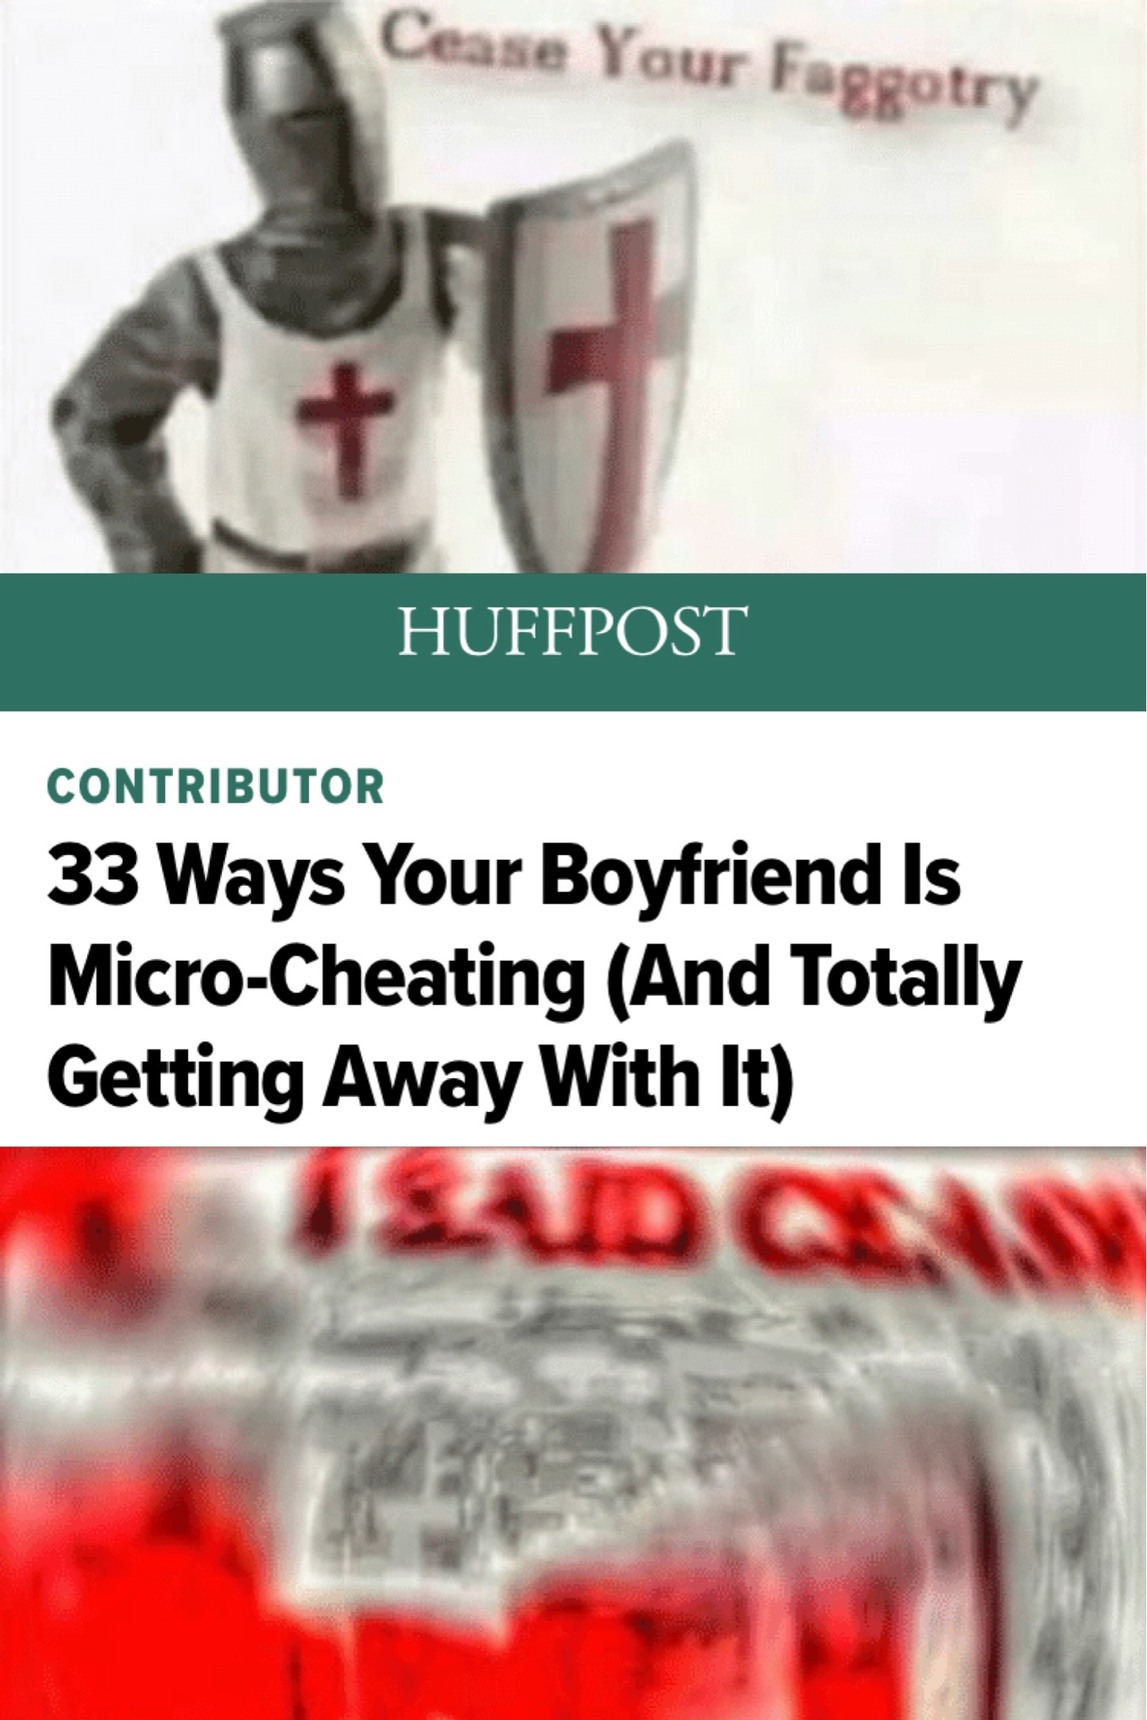 Reading the article gave me yet another cancer - meme